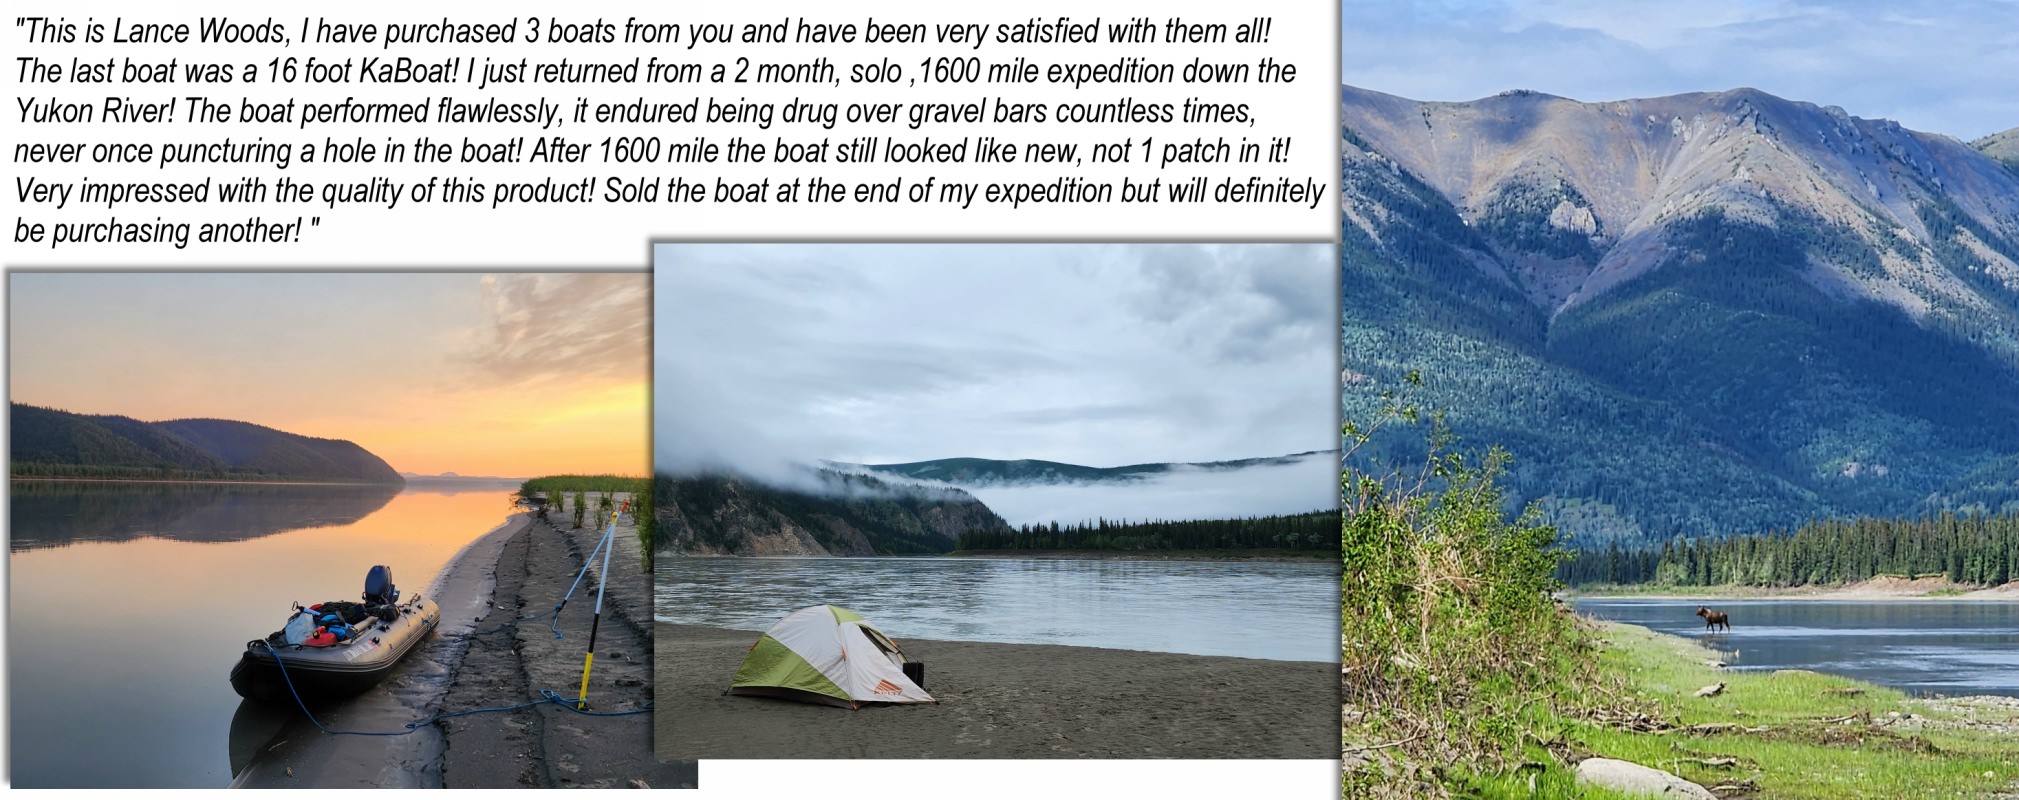 Customer's review of Saturn SK487XL KaBoat after expedition on Yukon, Alasksa.